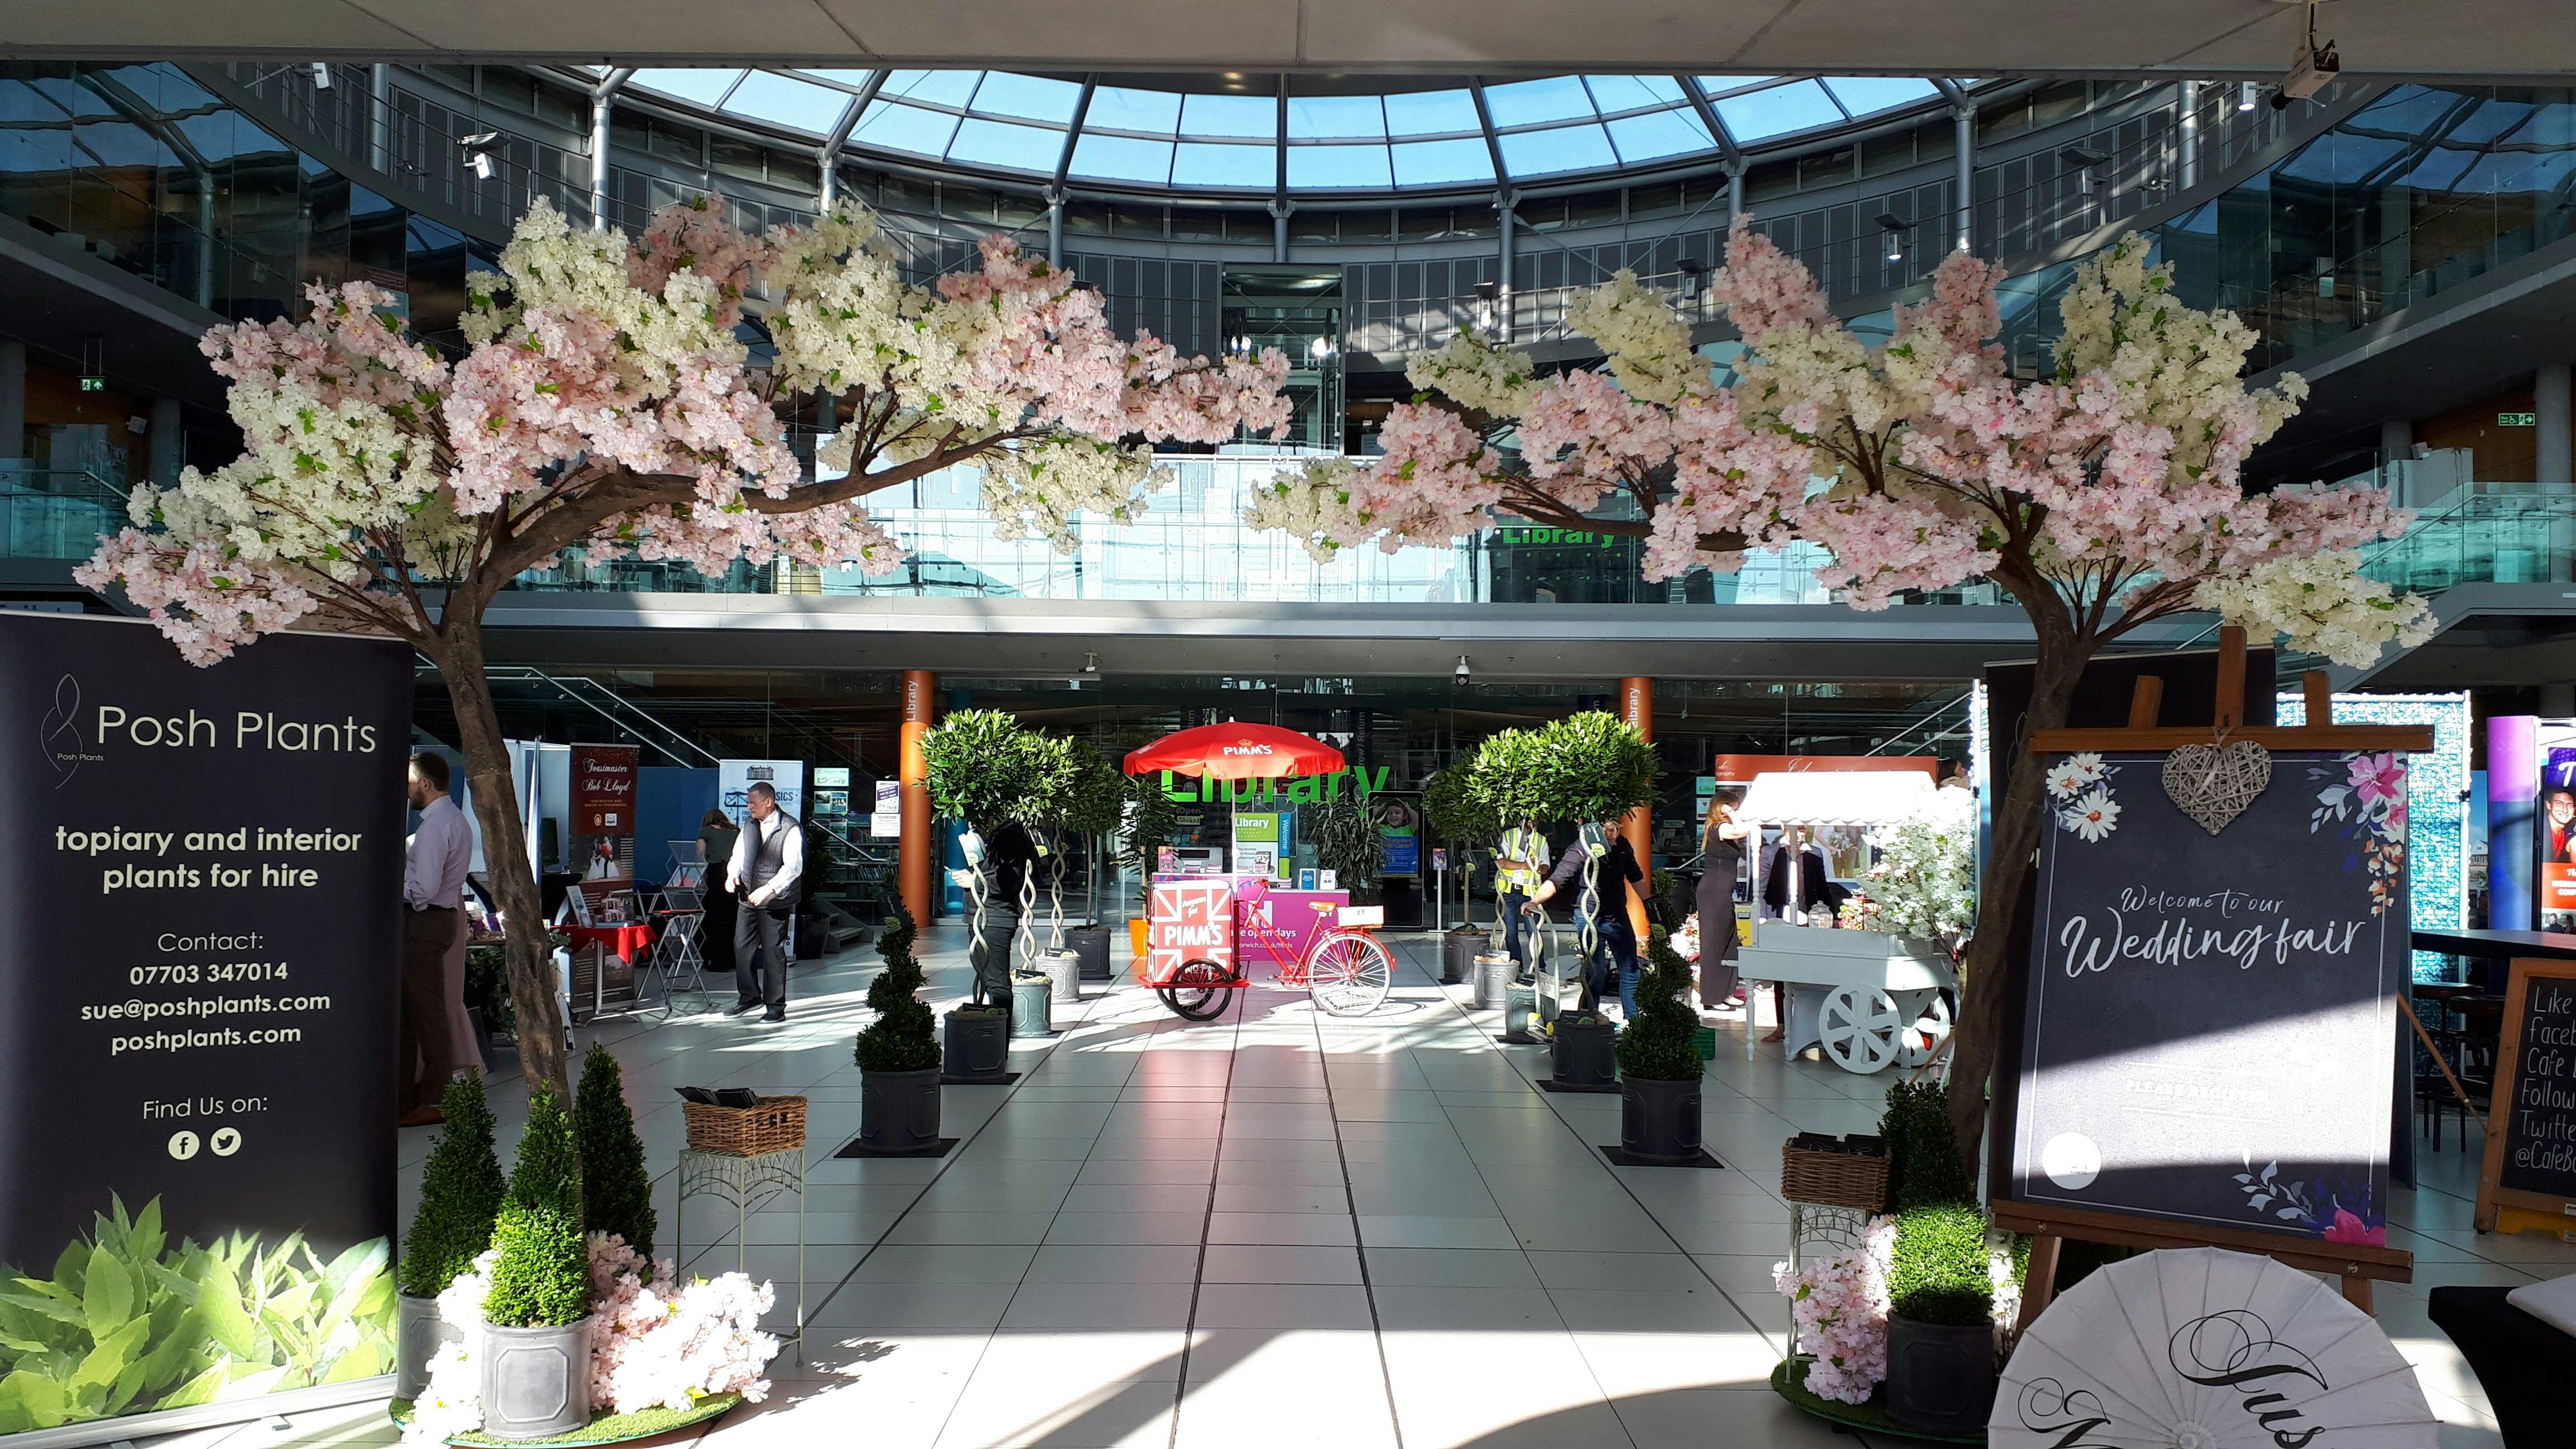 Artificial blossom trees and topiary bushes dress the entrance of The Atrium at The Forum Norwich.